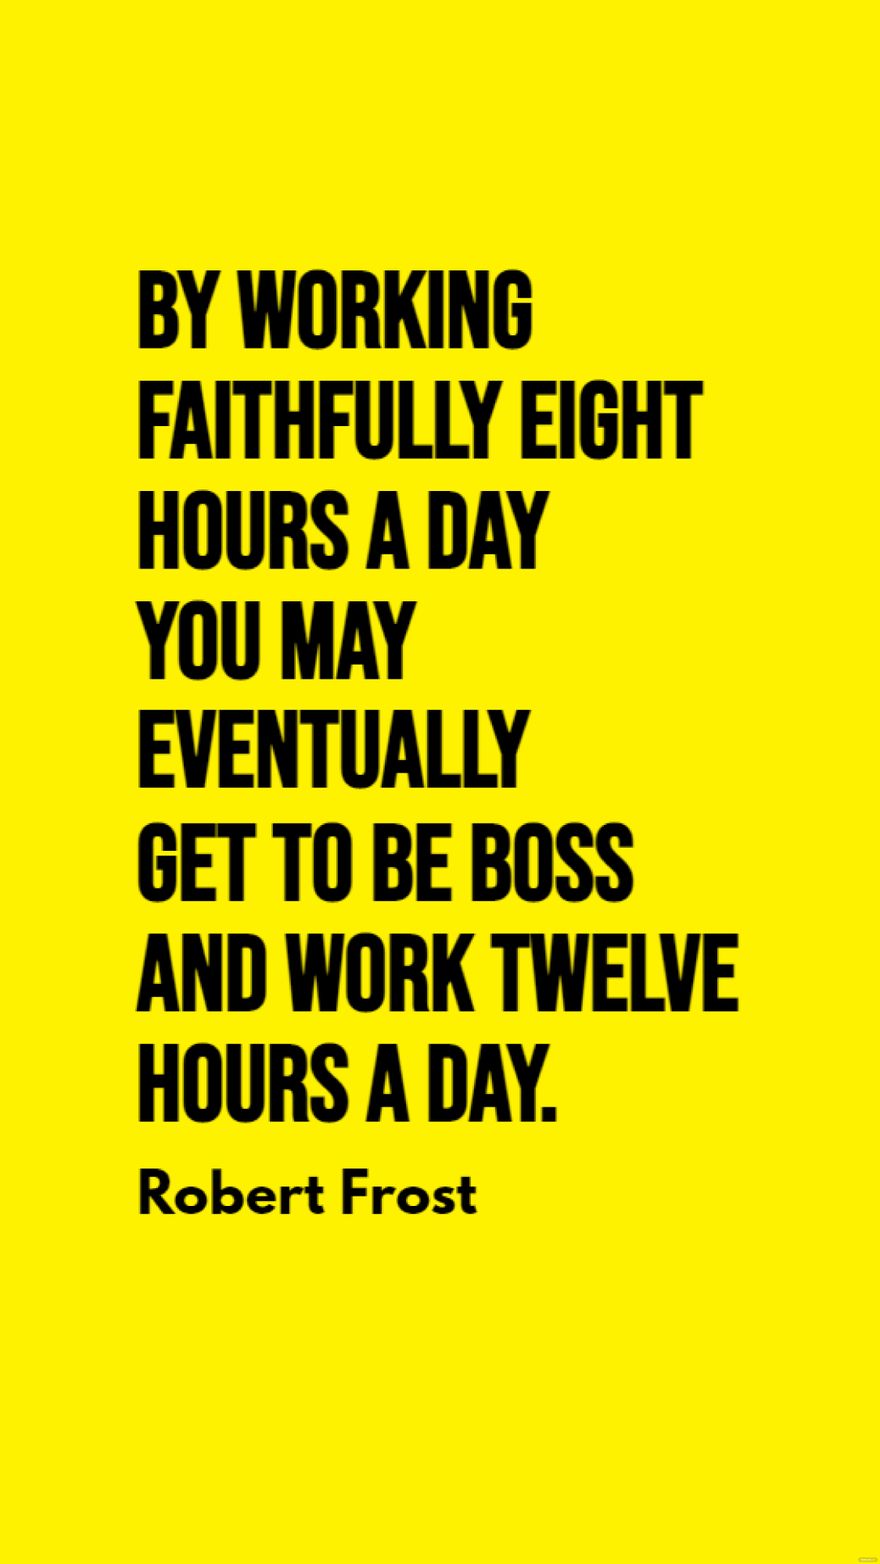 Robert Frost - By working faithfully eight hours a day you may eventually get to be boss and work twelve hours a day. 